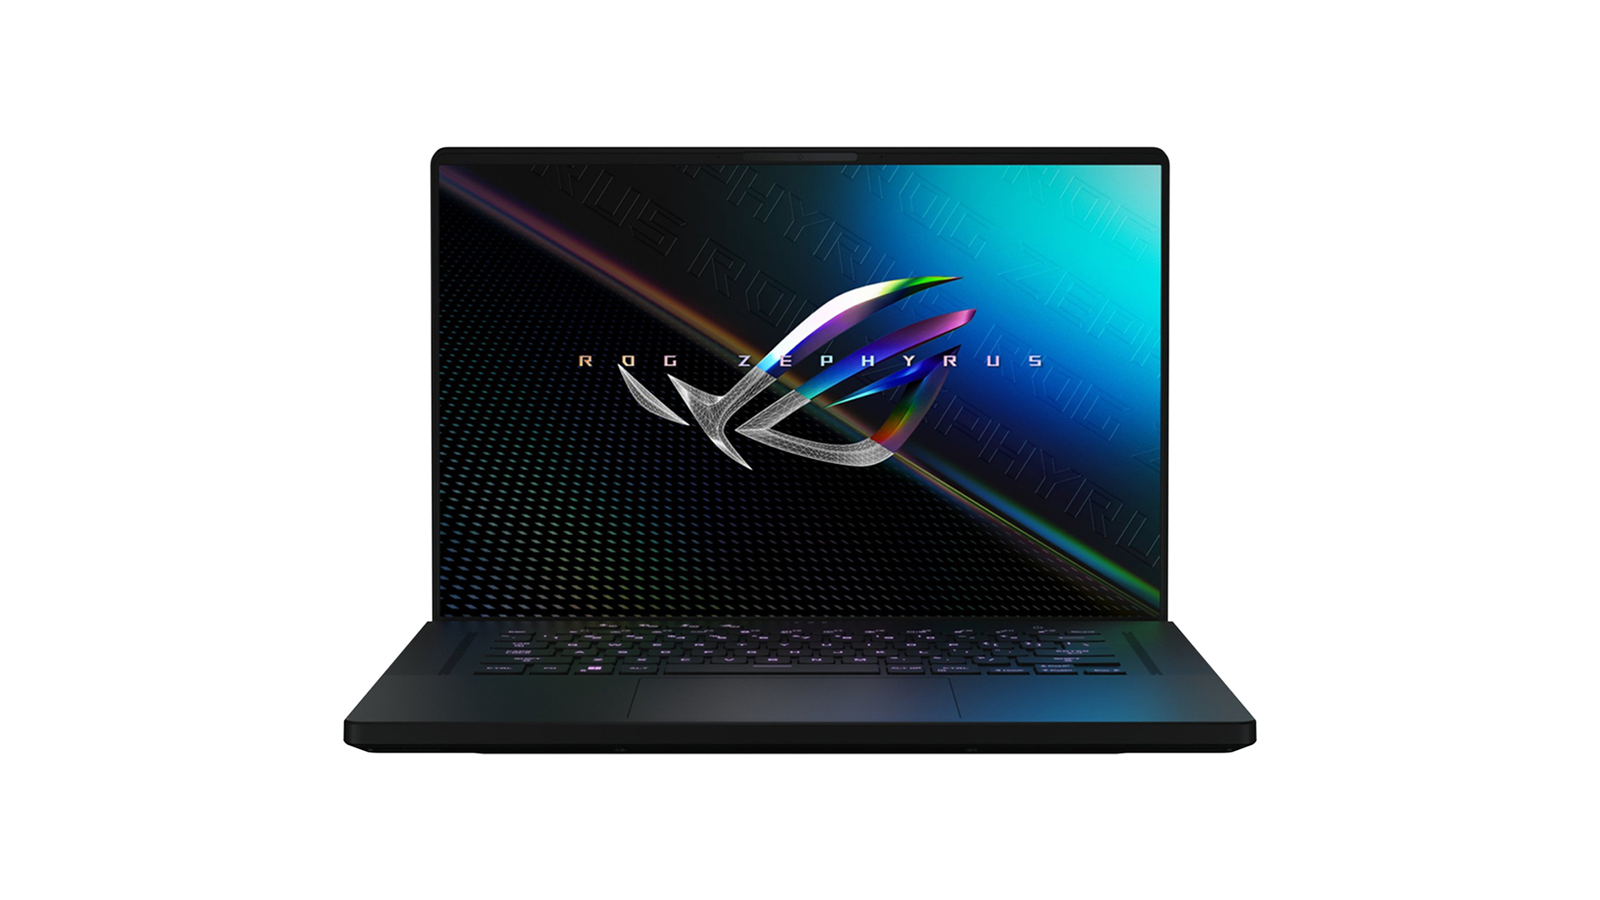 ASUS ROG Zephyrus M16 - Another powerful gaming laptop from ASUS